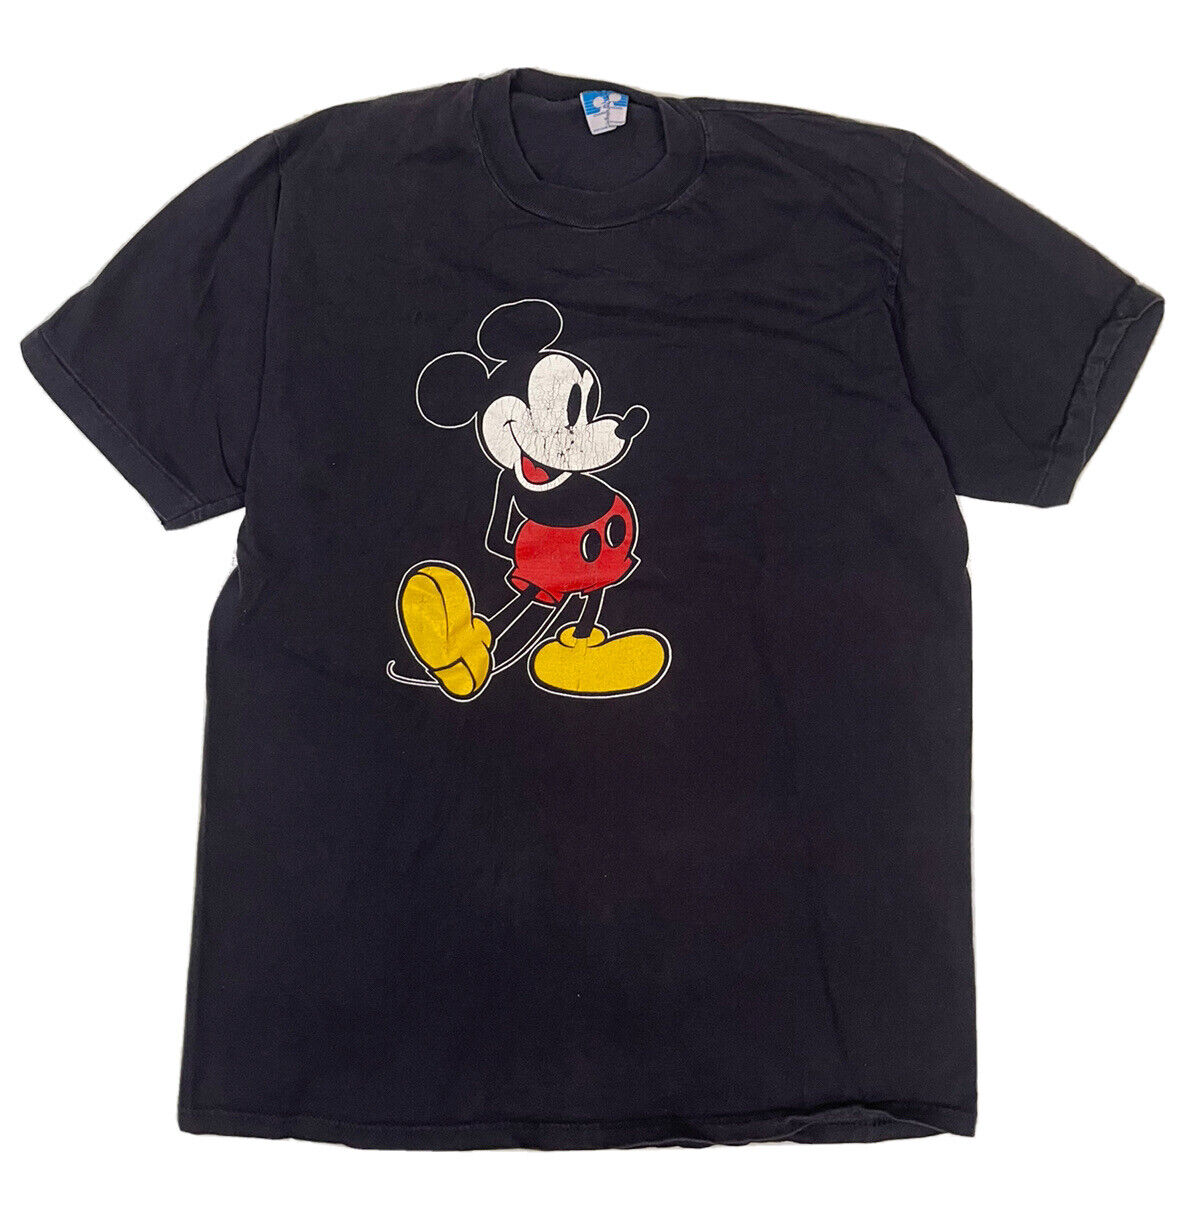 VTG 1980’s Disney Mickey Mouse T-shirt Tag Large Small Black  Made In USA